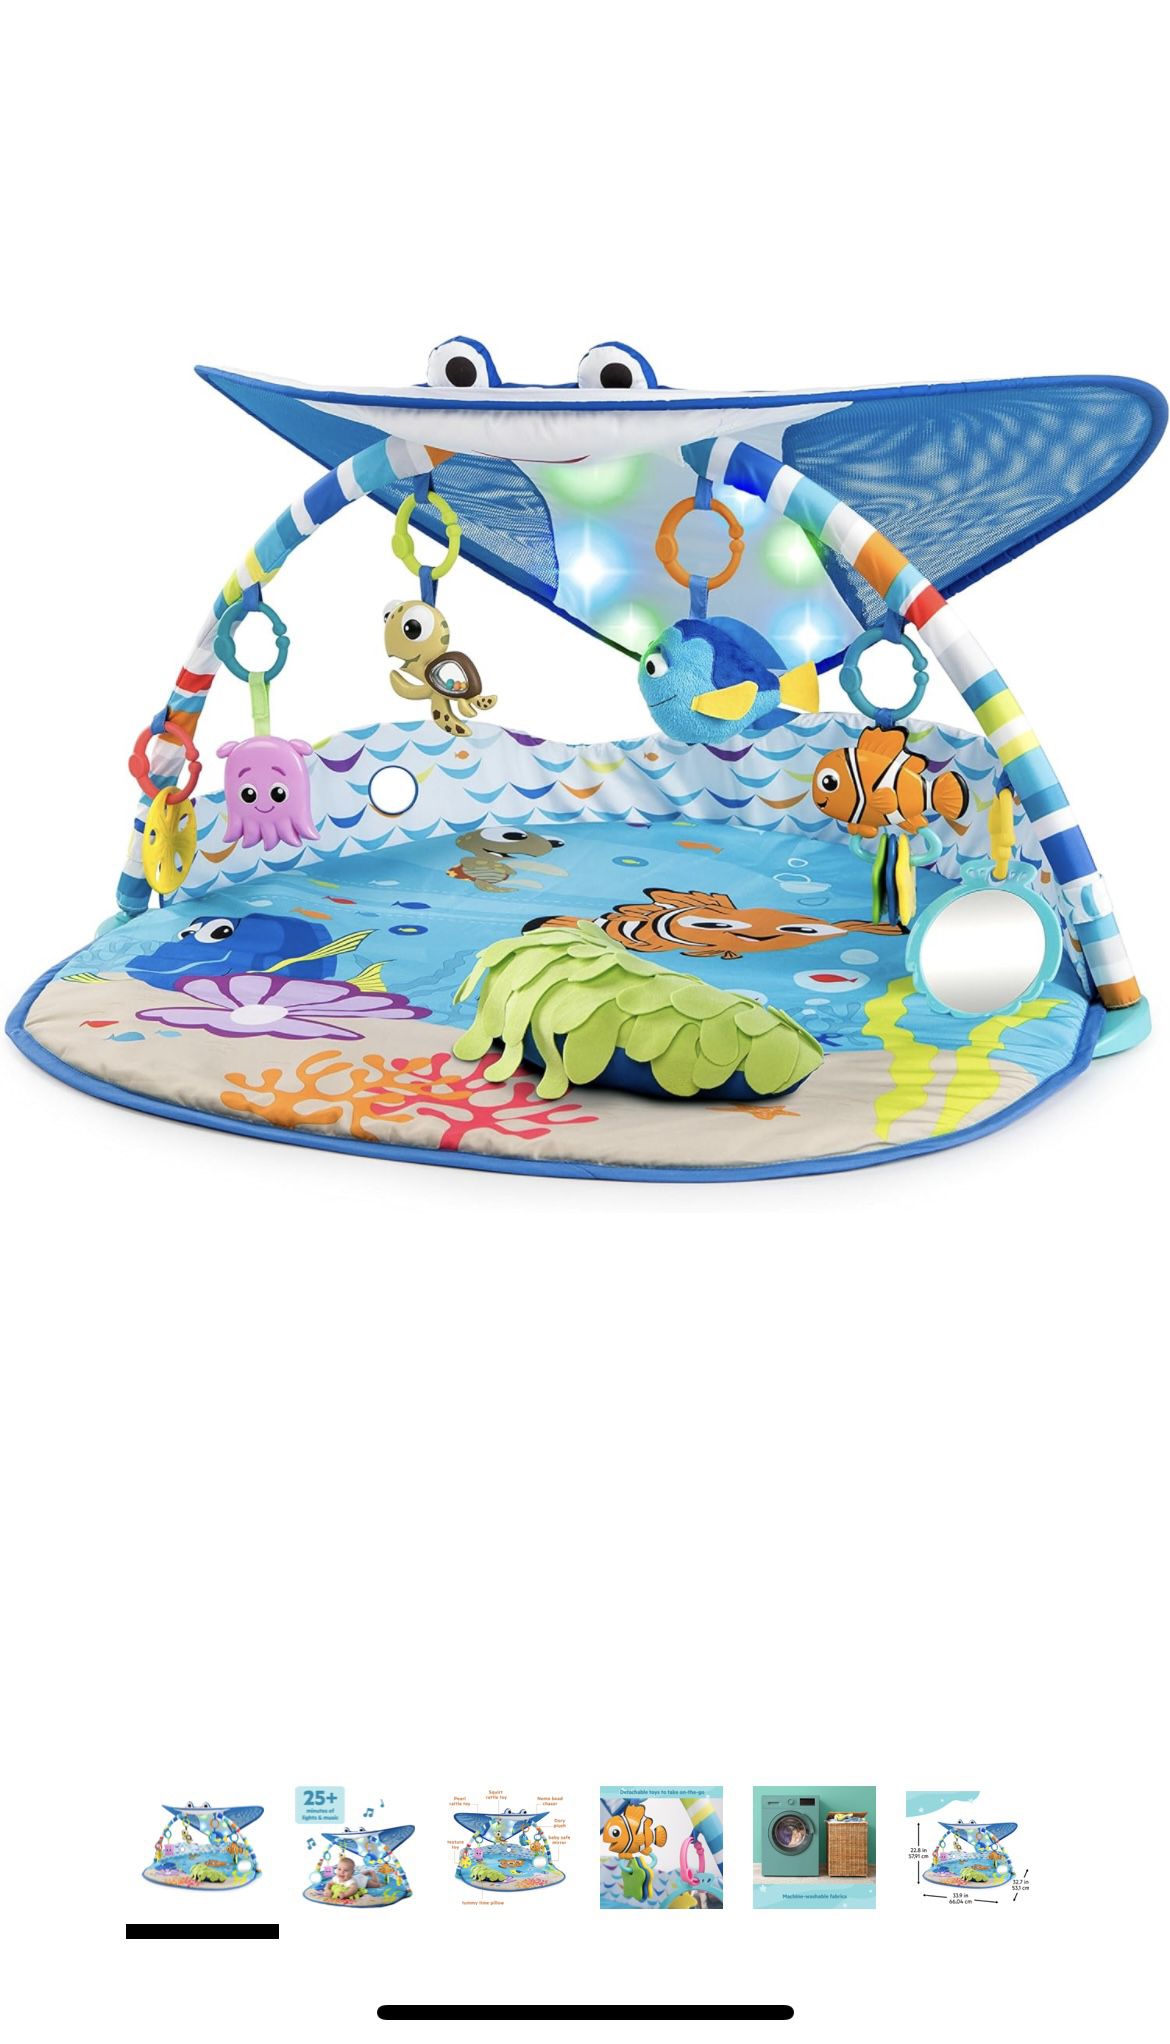 Bright Starts Finding Nemo Mr. Ray Ocean Lights & Music Baby Activity Gym with Tummy Time Pillow, Newborn+